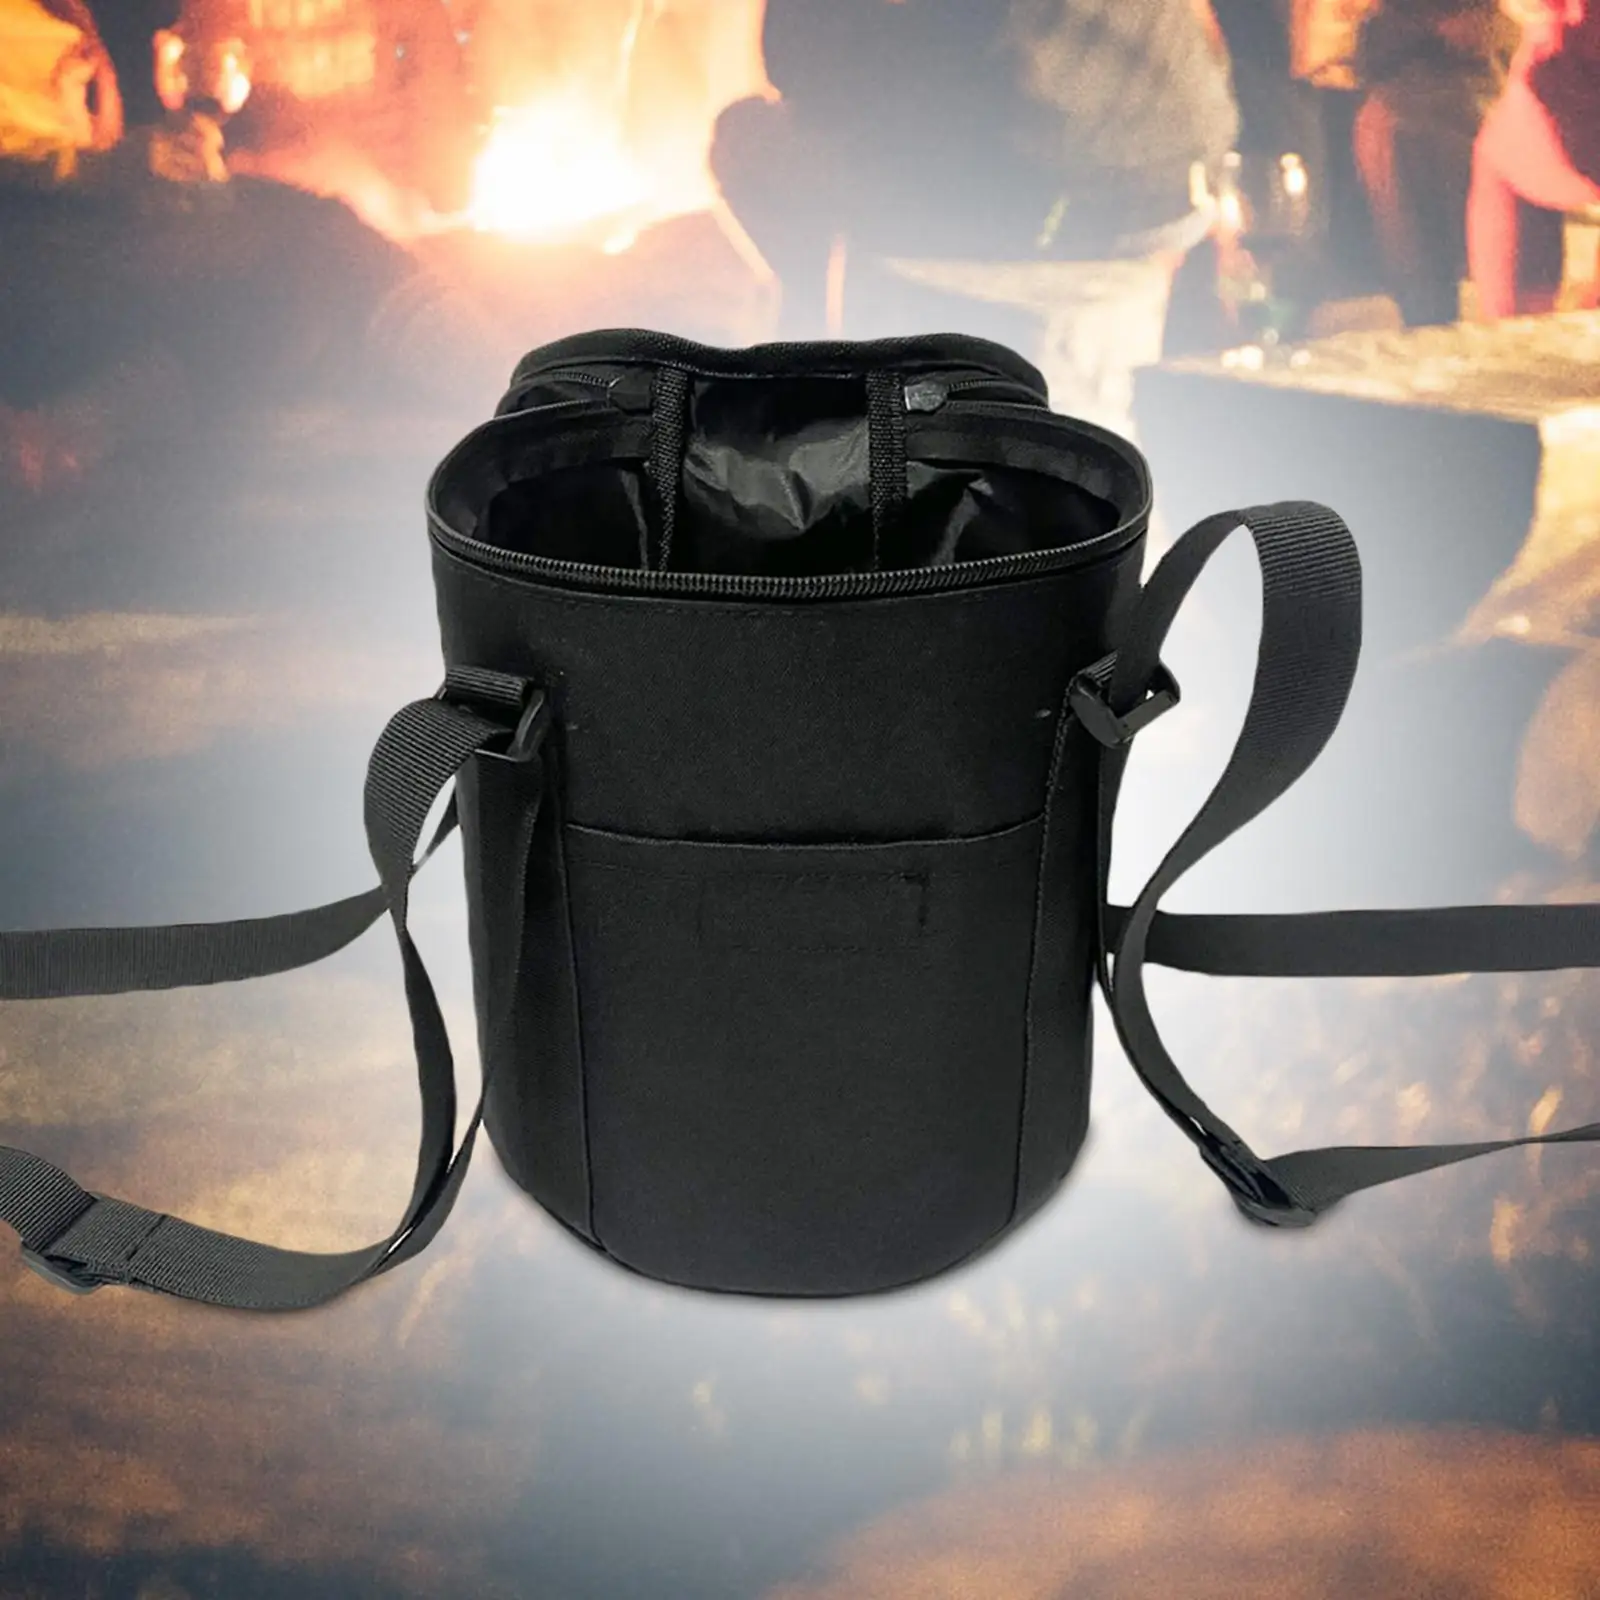 Tabletop Fire Pit Bag Portable Fire Bowl Carry Bag for Beach Picnic Camping